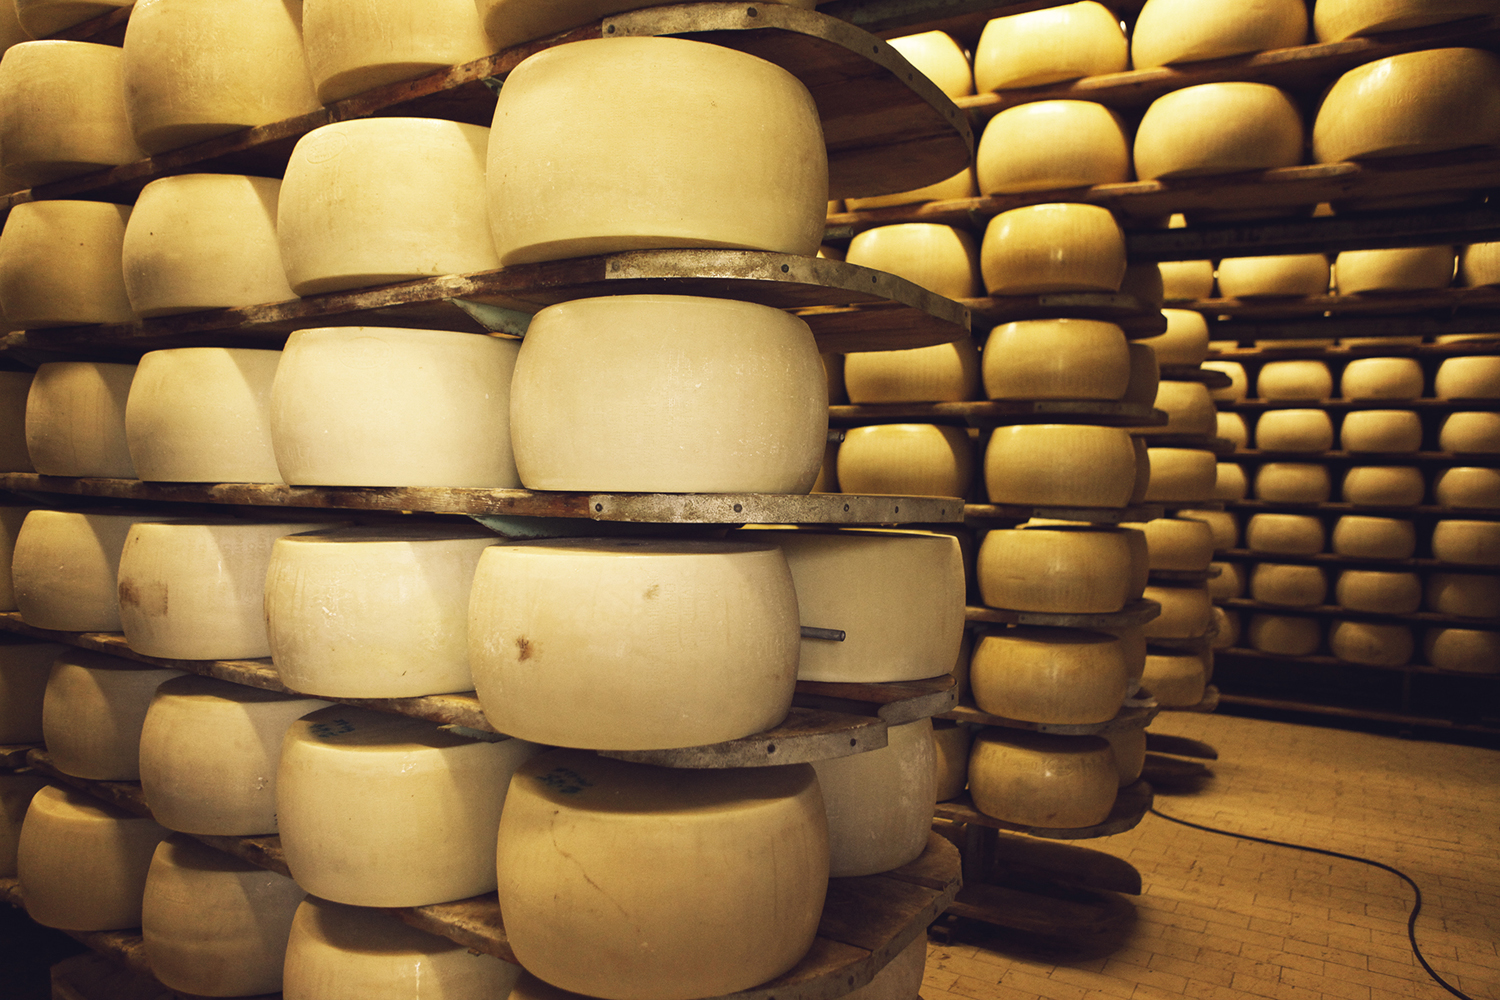 A novice cheesemaker's guide on how to make cheese at home - The